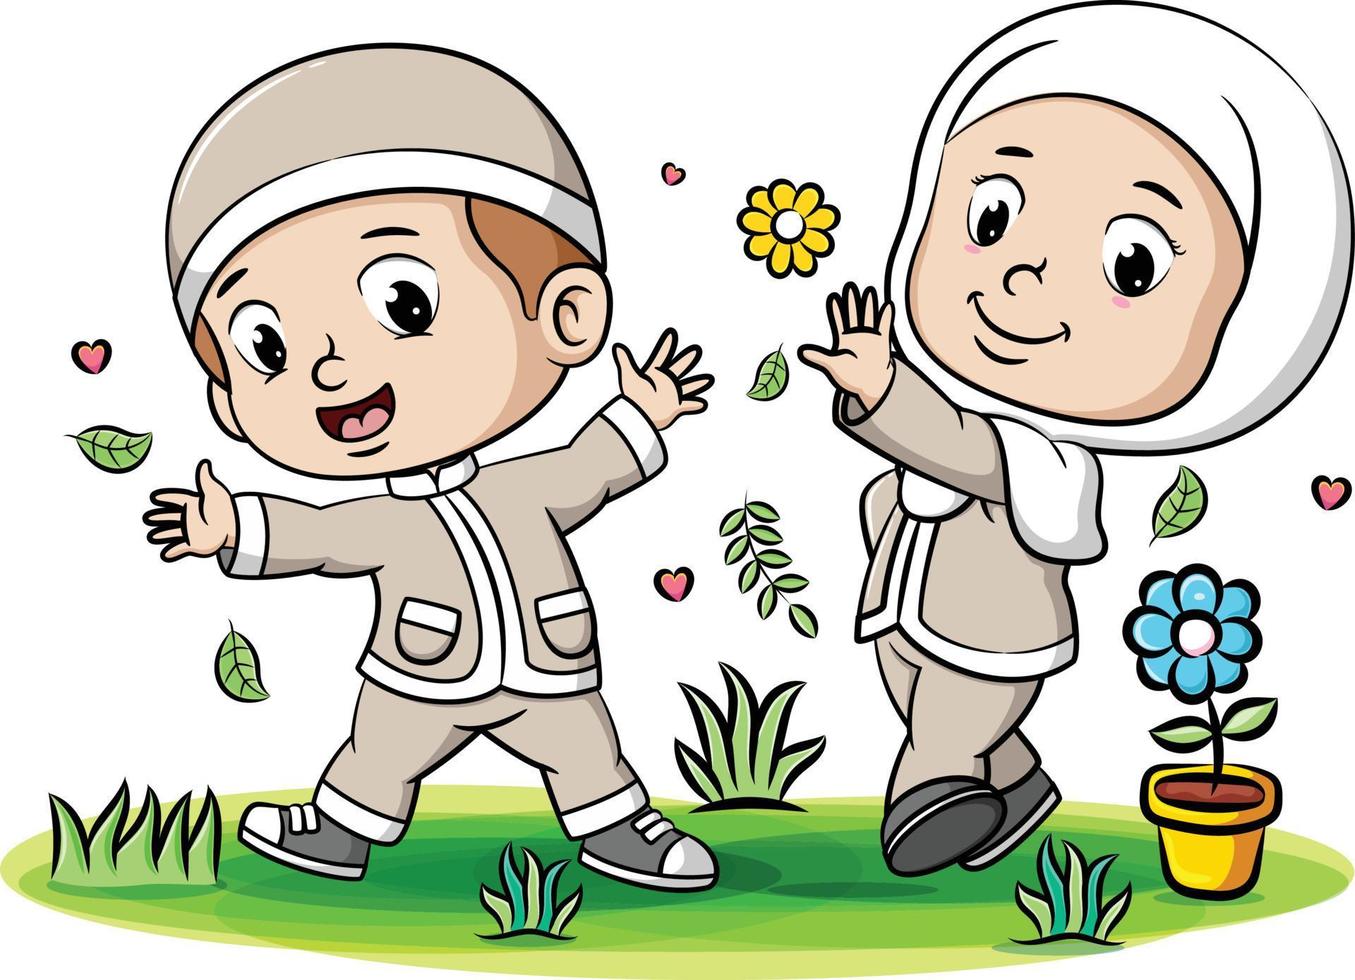 The moslem children are playing together with the flowers and leaves in the garden vector